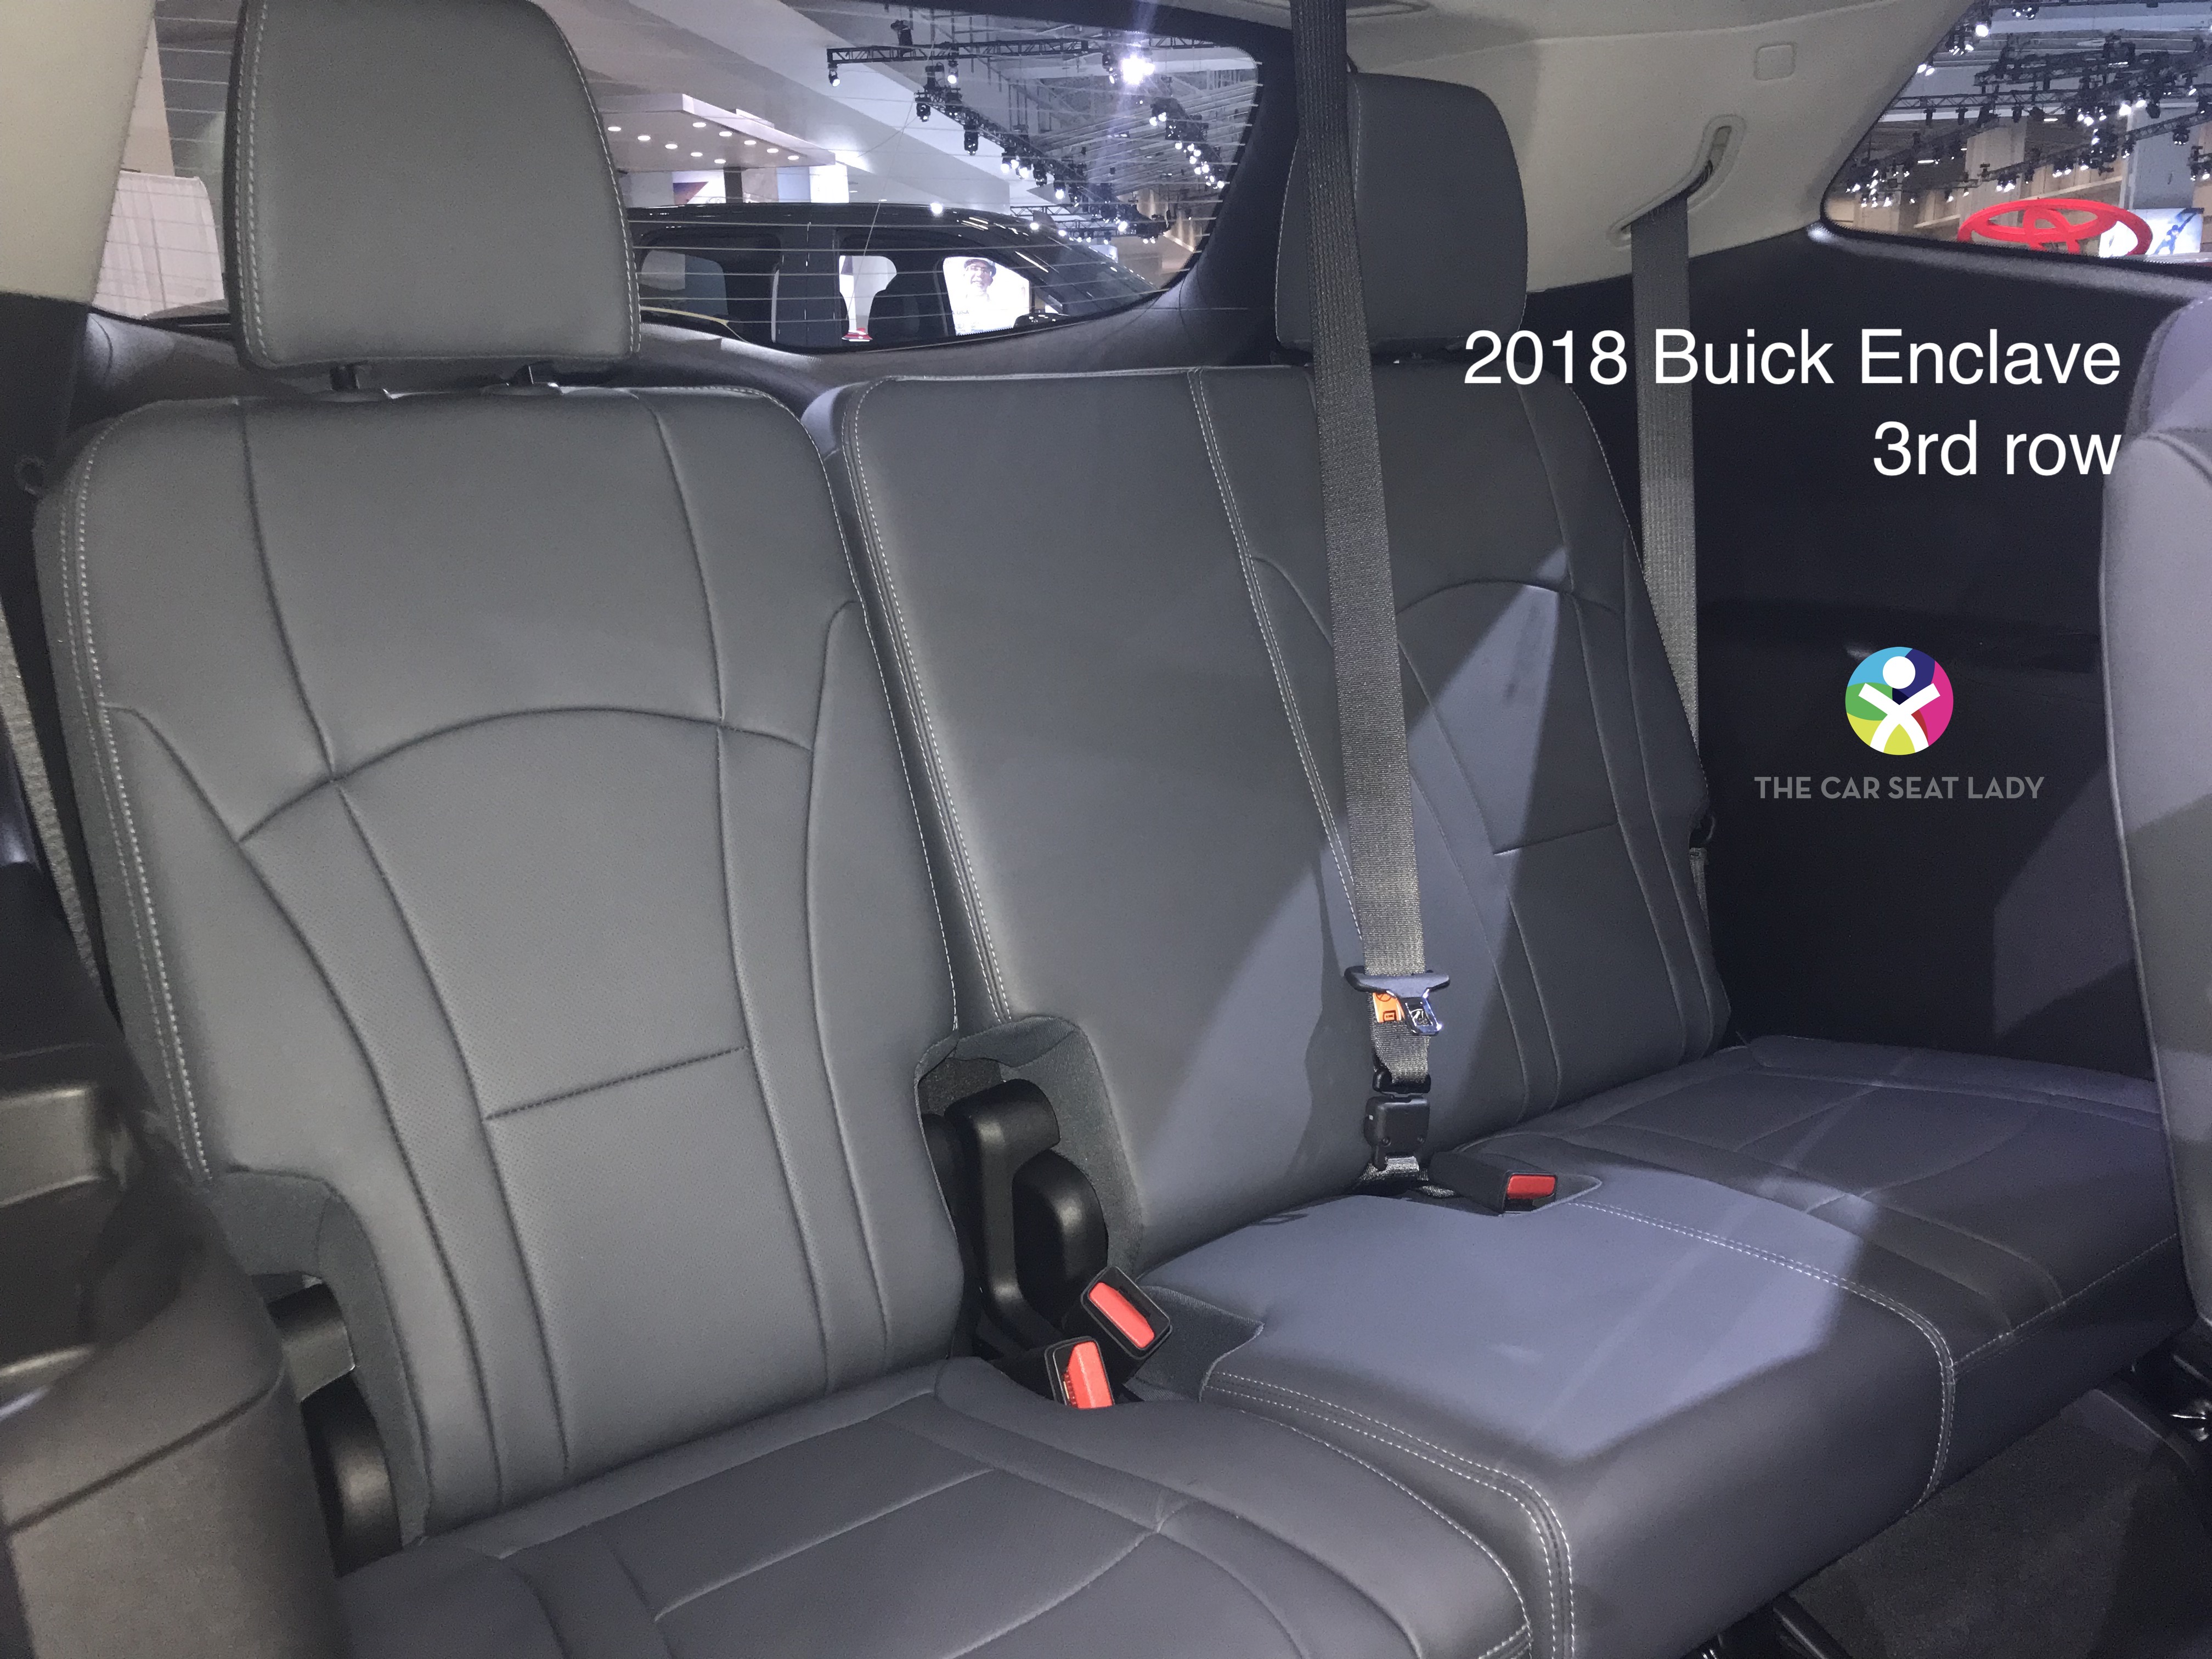 The Car Seat Ladybuick Enclave The Car Seat Lady